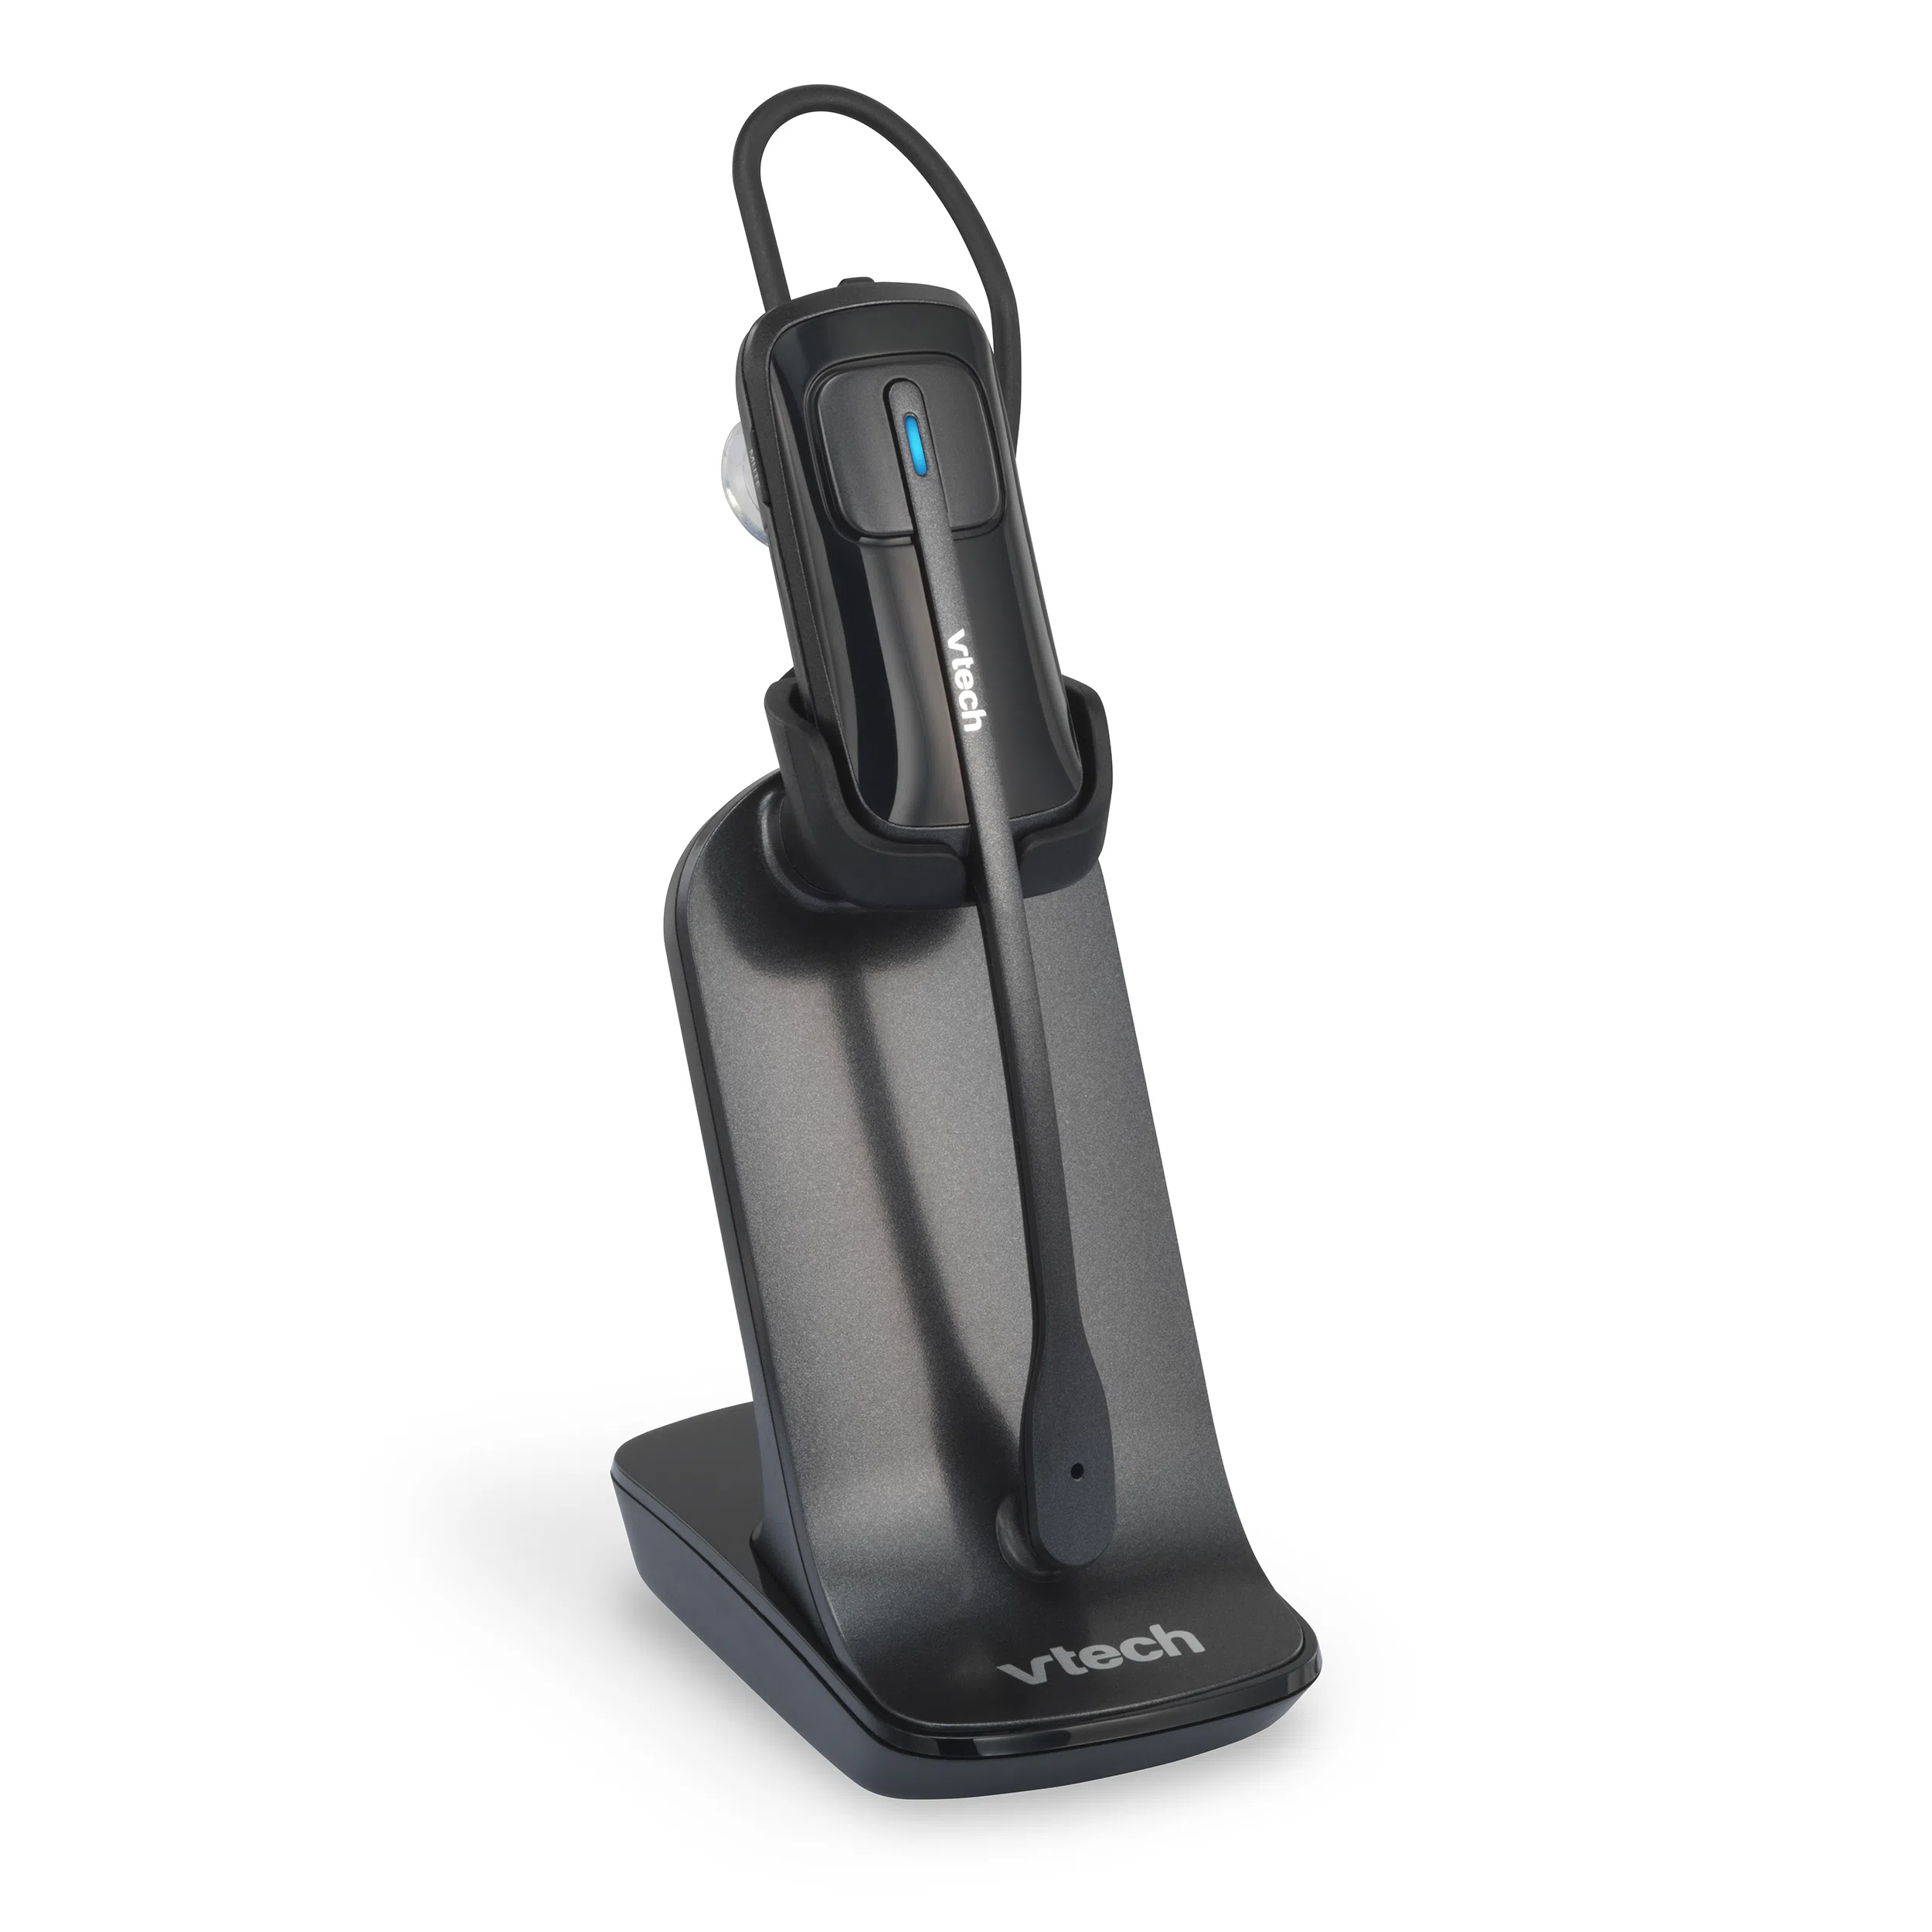 Does the VTech VH6102 ErisTerminal® Headset work with AT&T ML17928 2-line speakerphone?